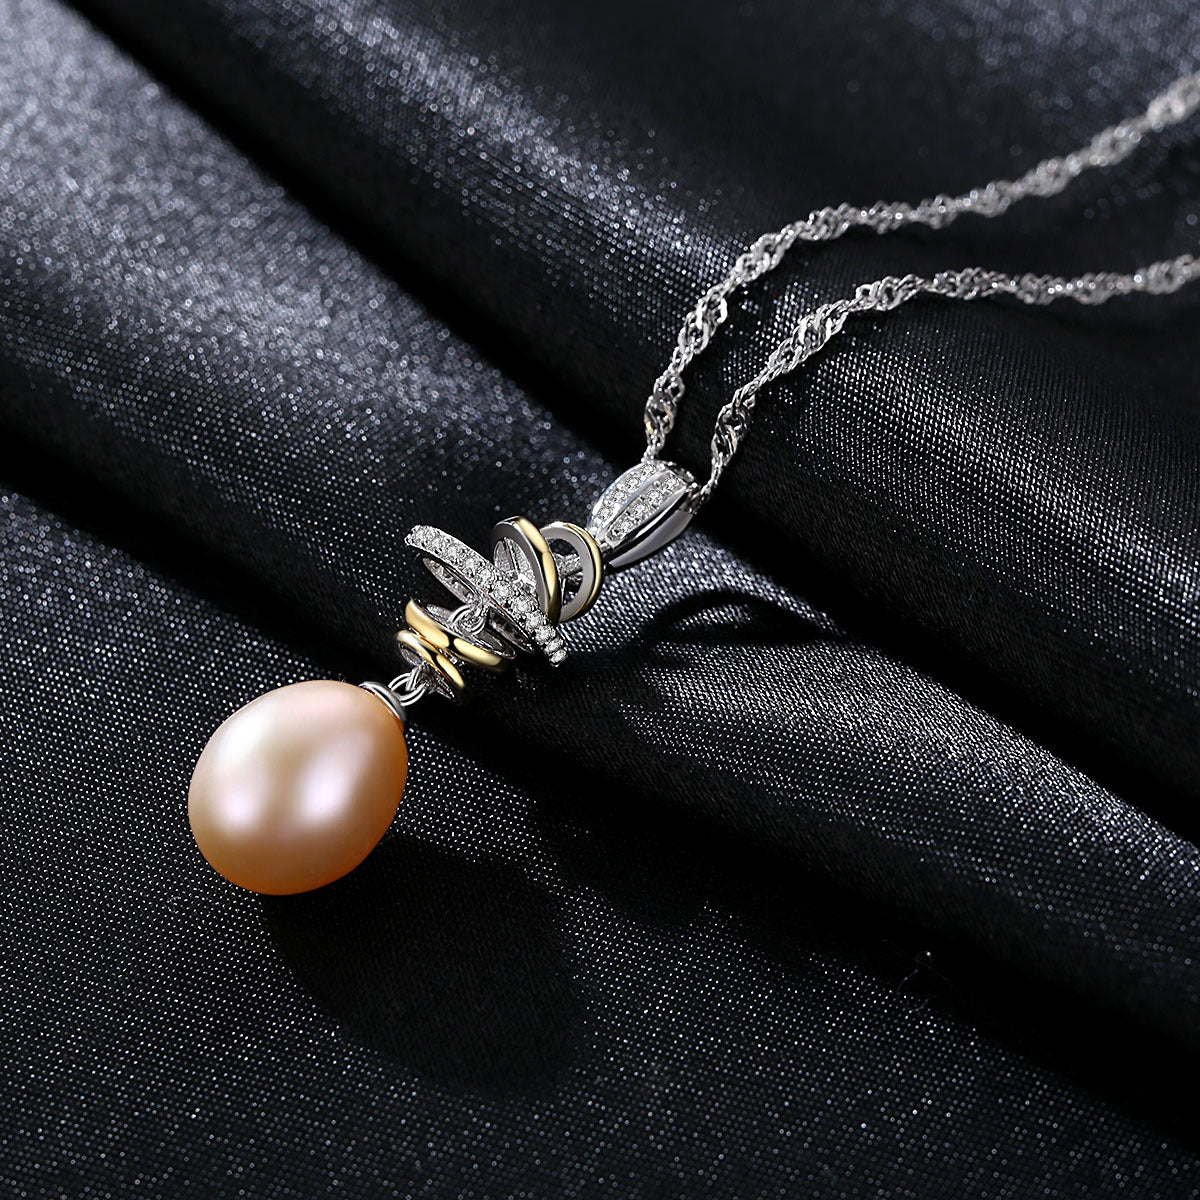 Pearl Planet Necklace - HERS